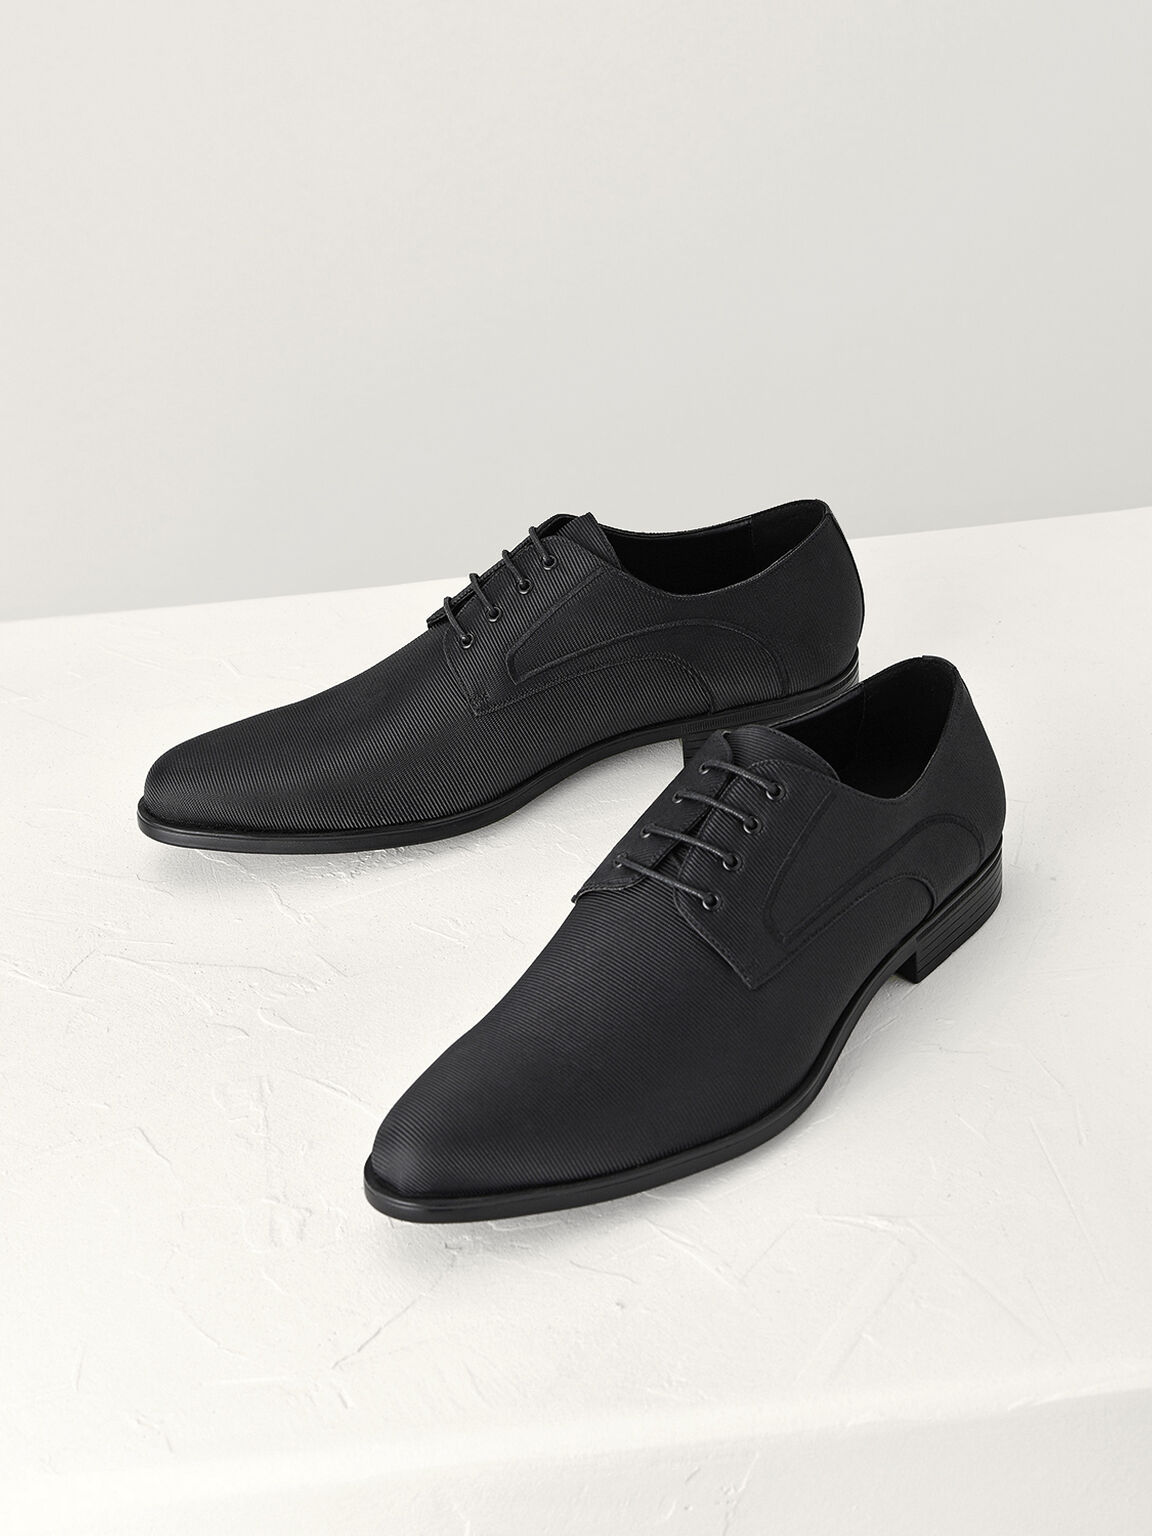 Pointed Toe Derby Shoes, Black